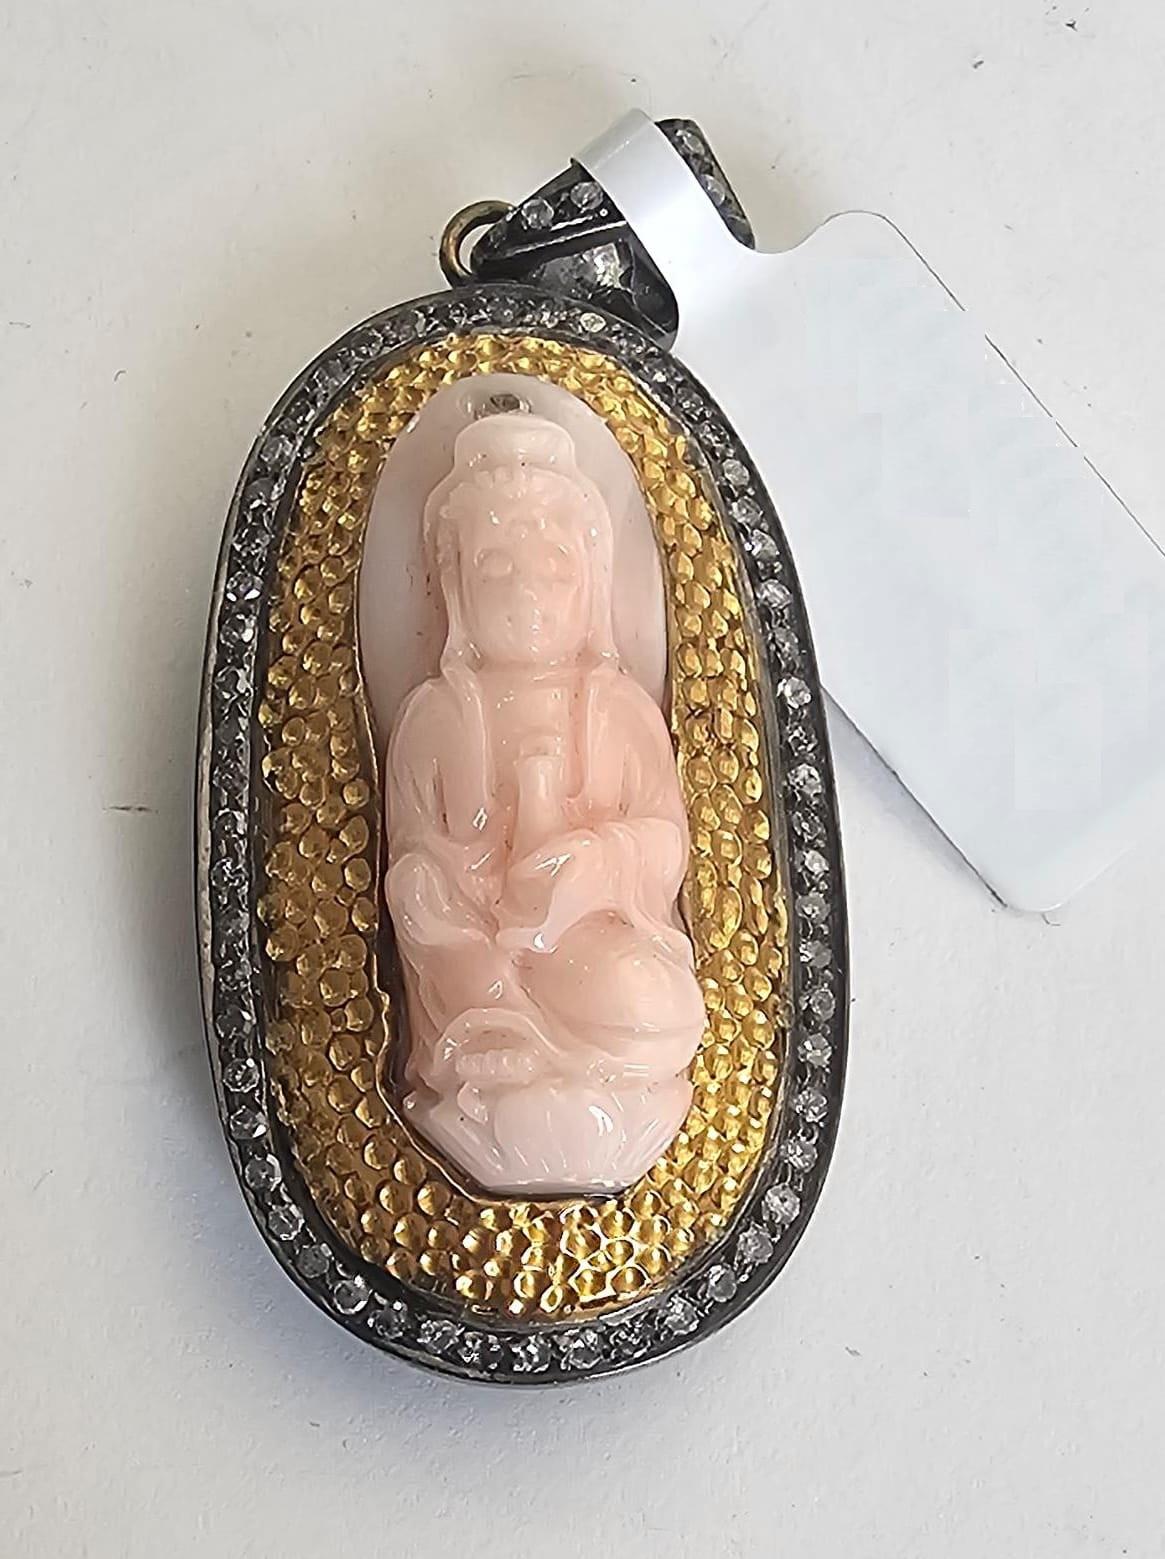 Artisan Carved Buddha On Coral Pendant Accented With Diamonds Made In 18k Gold & Silver For Sale